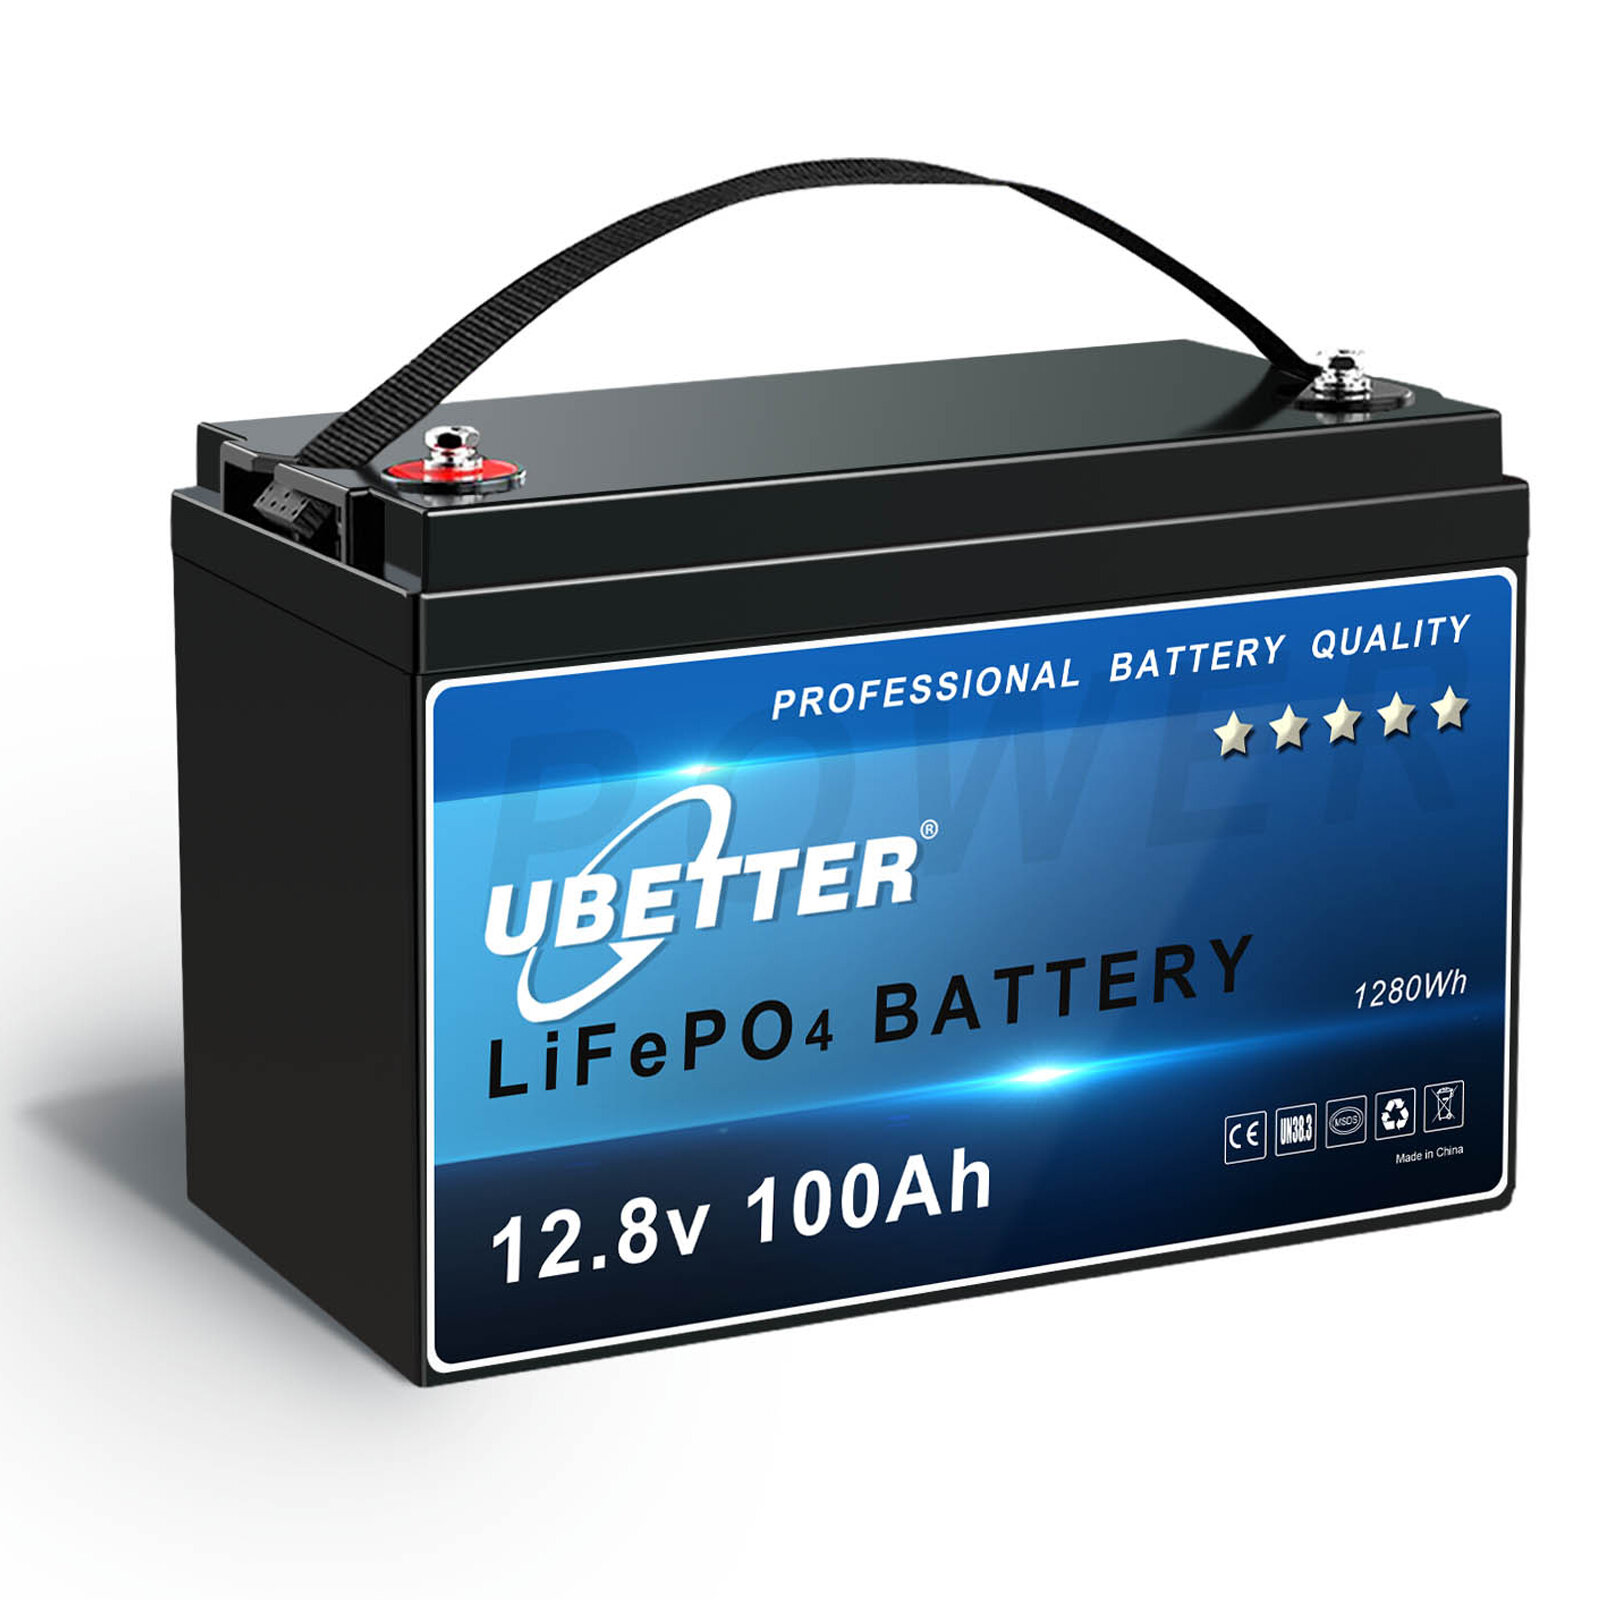 

[EU Direct]UBETTER 12V 100Ah LiFePO4 Battery Lithium Battery Pack Backup Power 1280Wh Rechargeable with BMS Over 4000 Ti